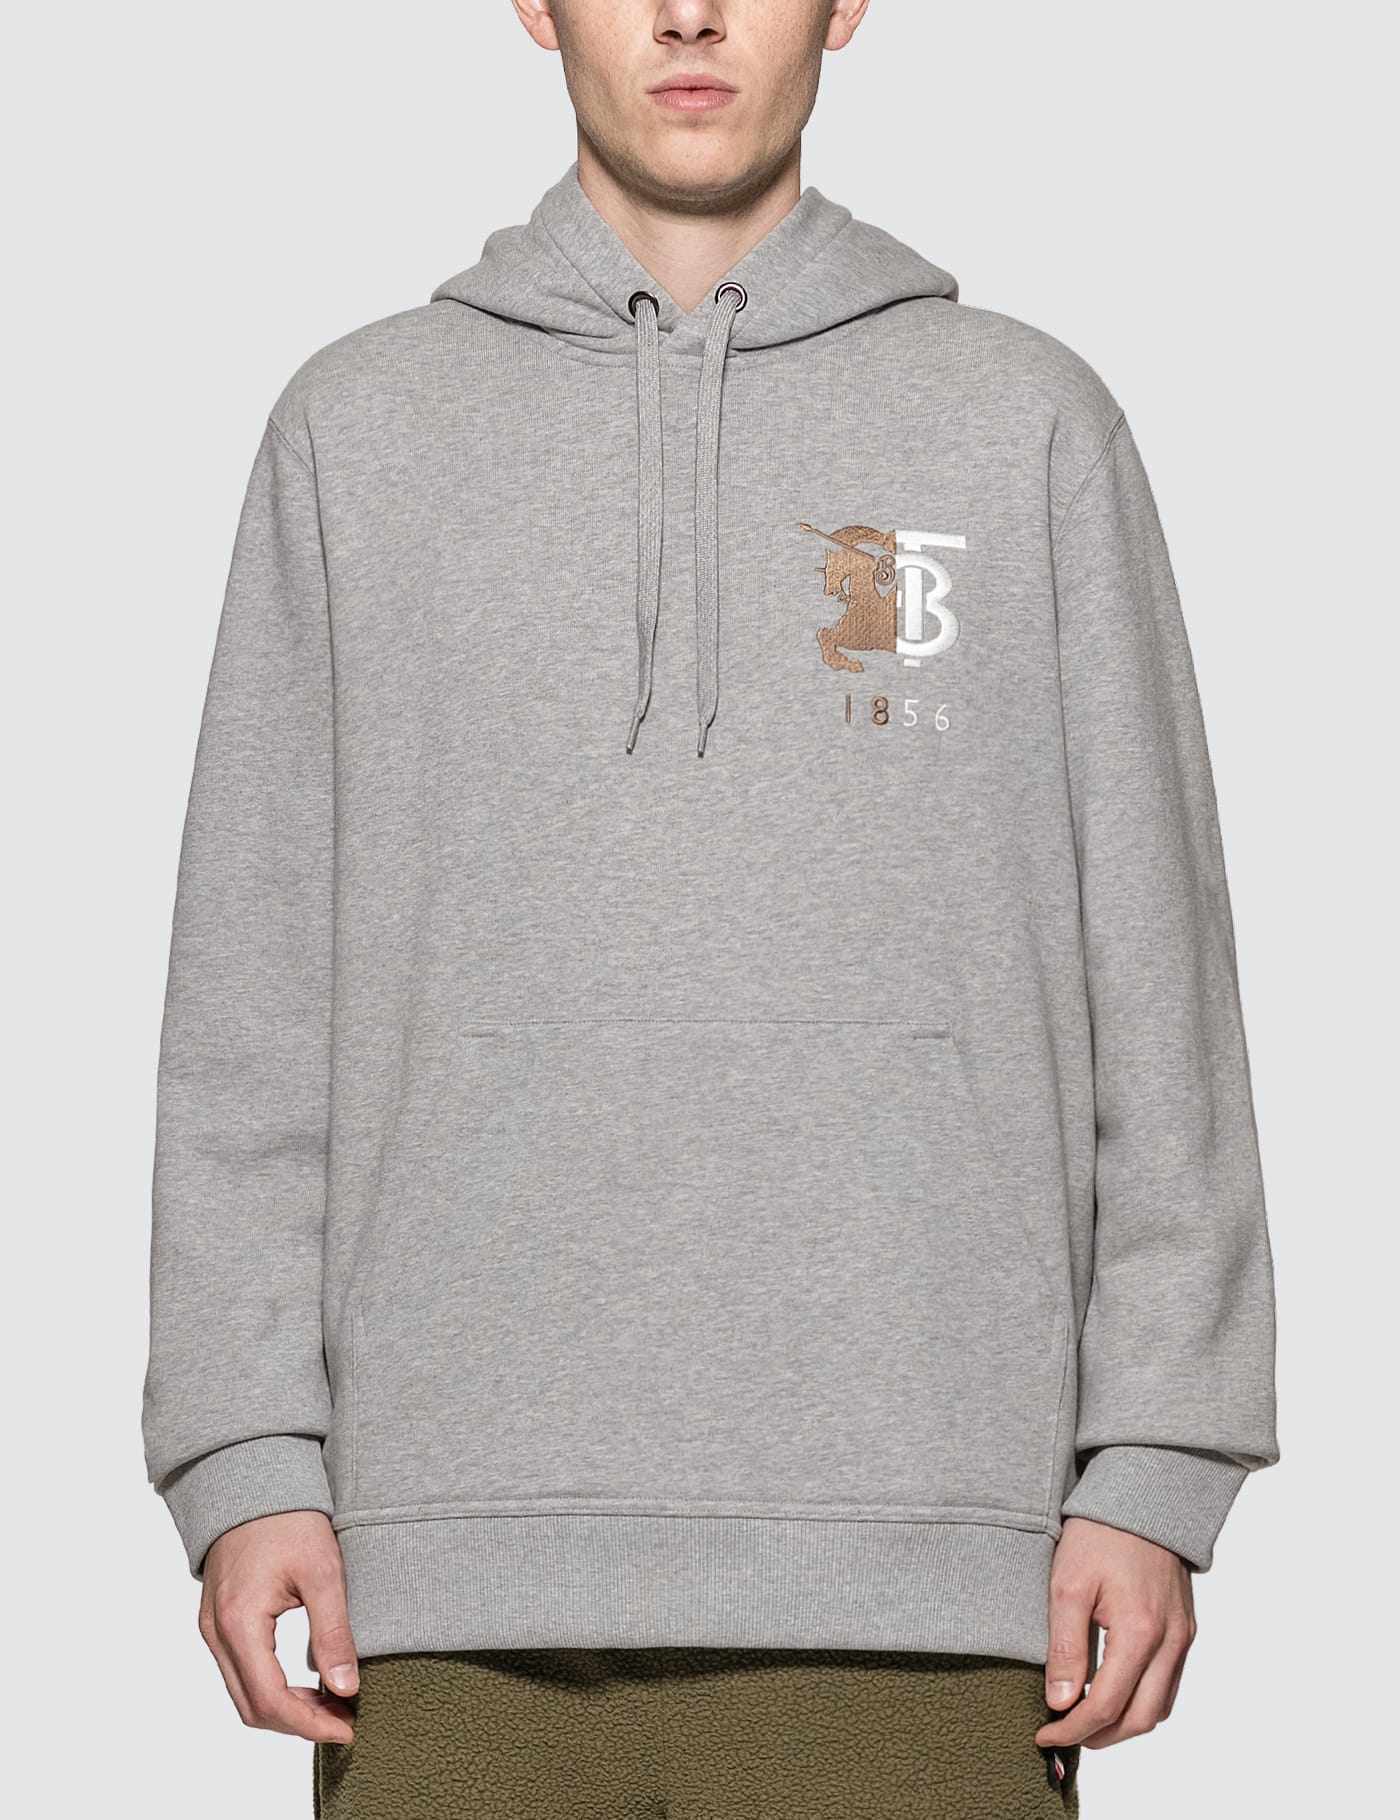 Burberry - 1856 Embroidered Logo Hoodie 